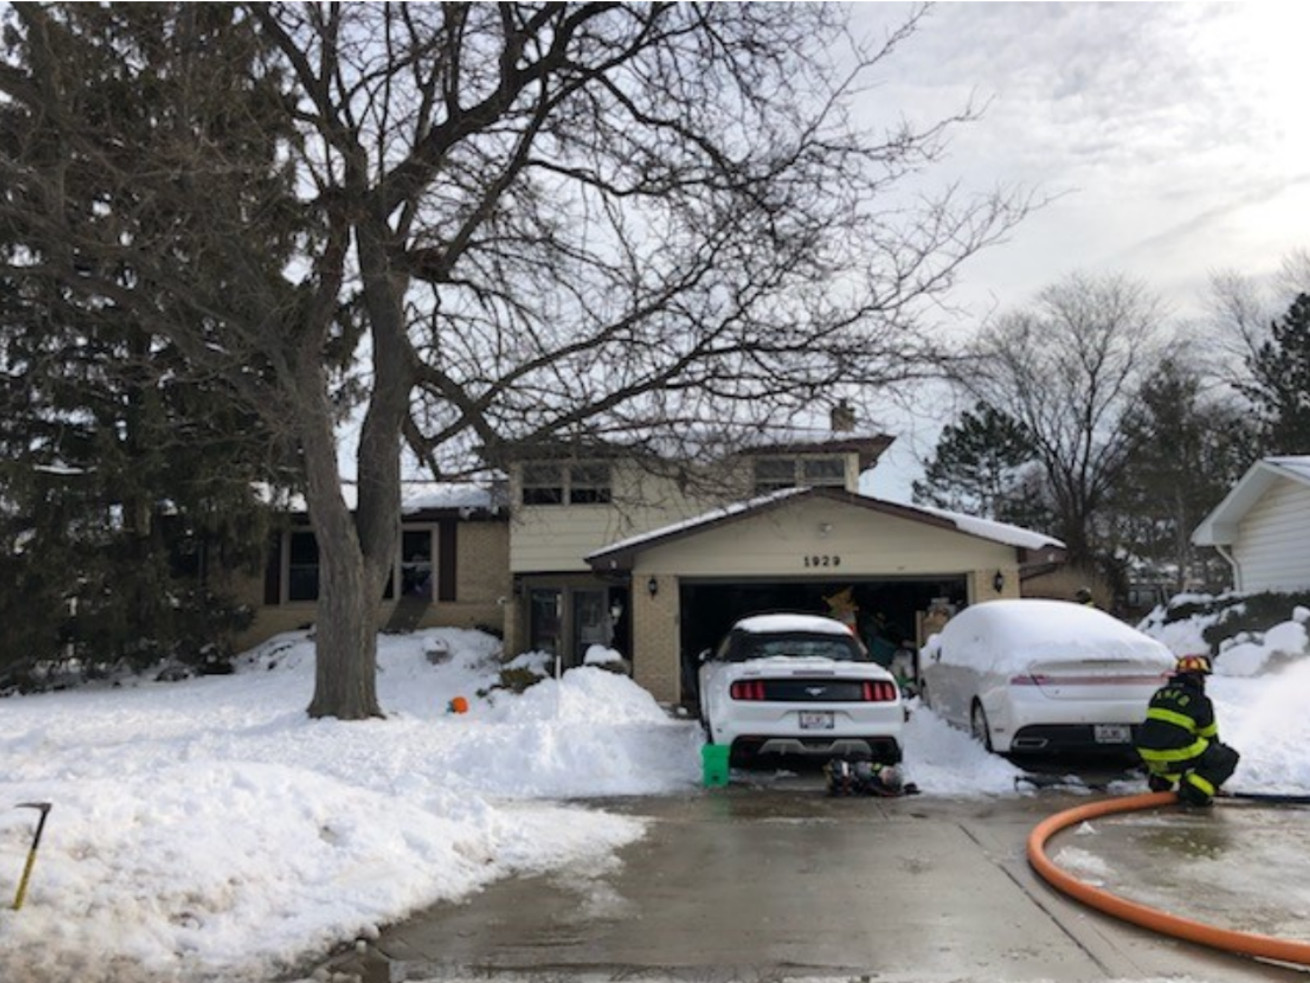 An elderly couple died after their house caught on fire Feb. 4, 2021 in Arlington Heights.